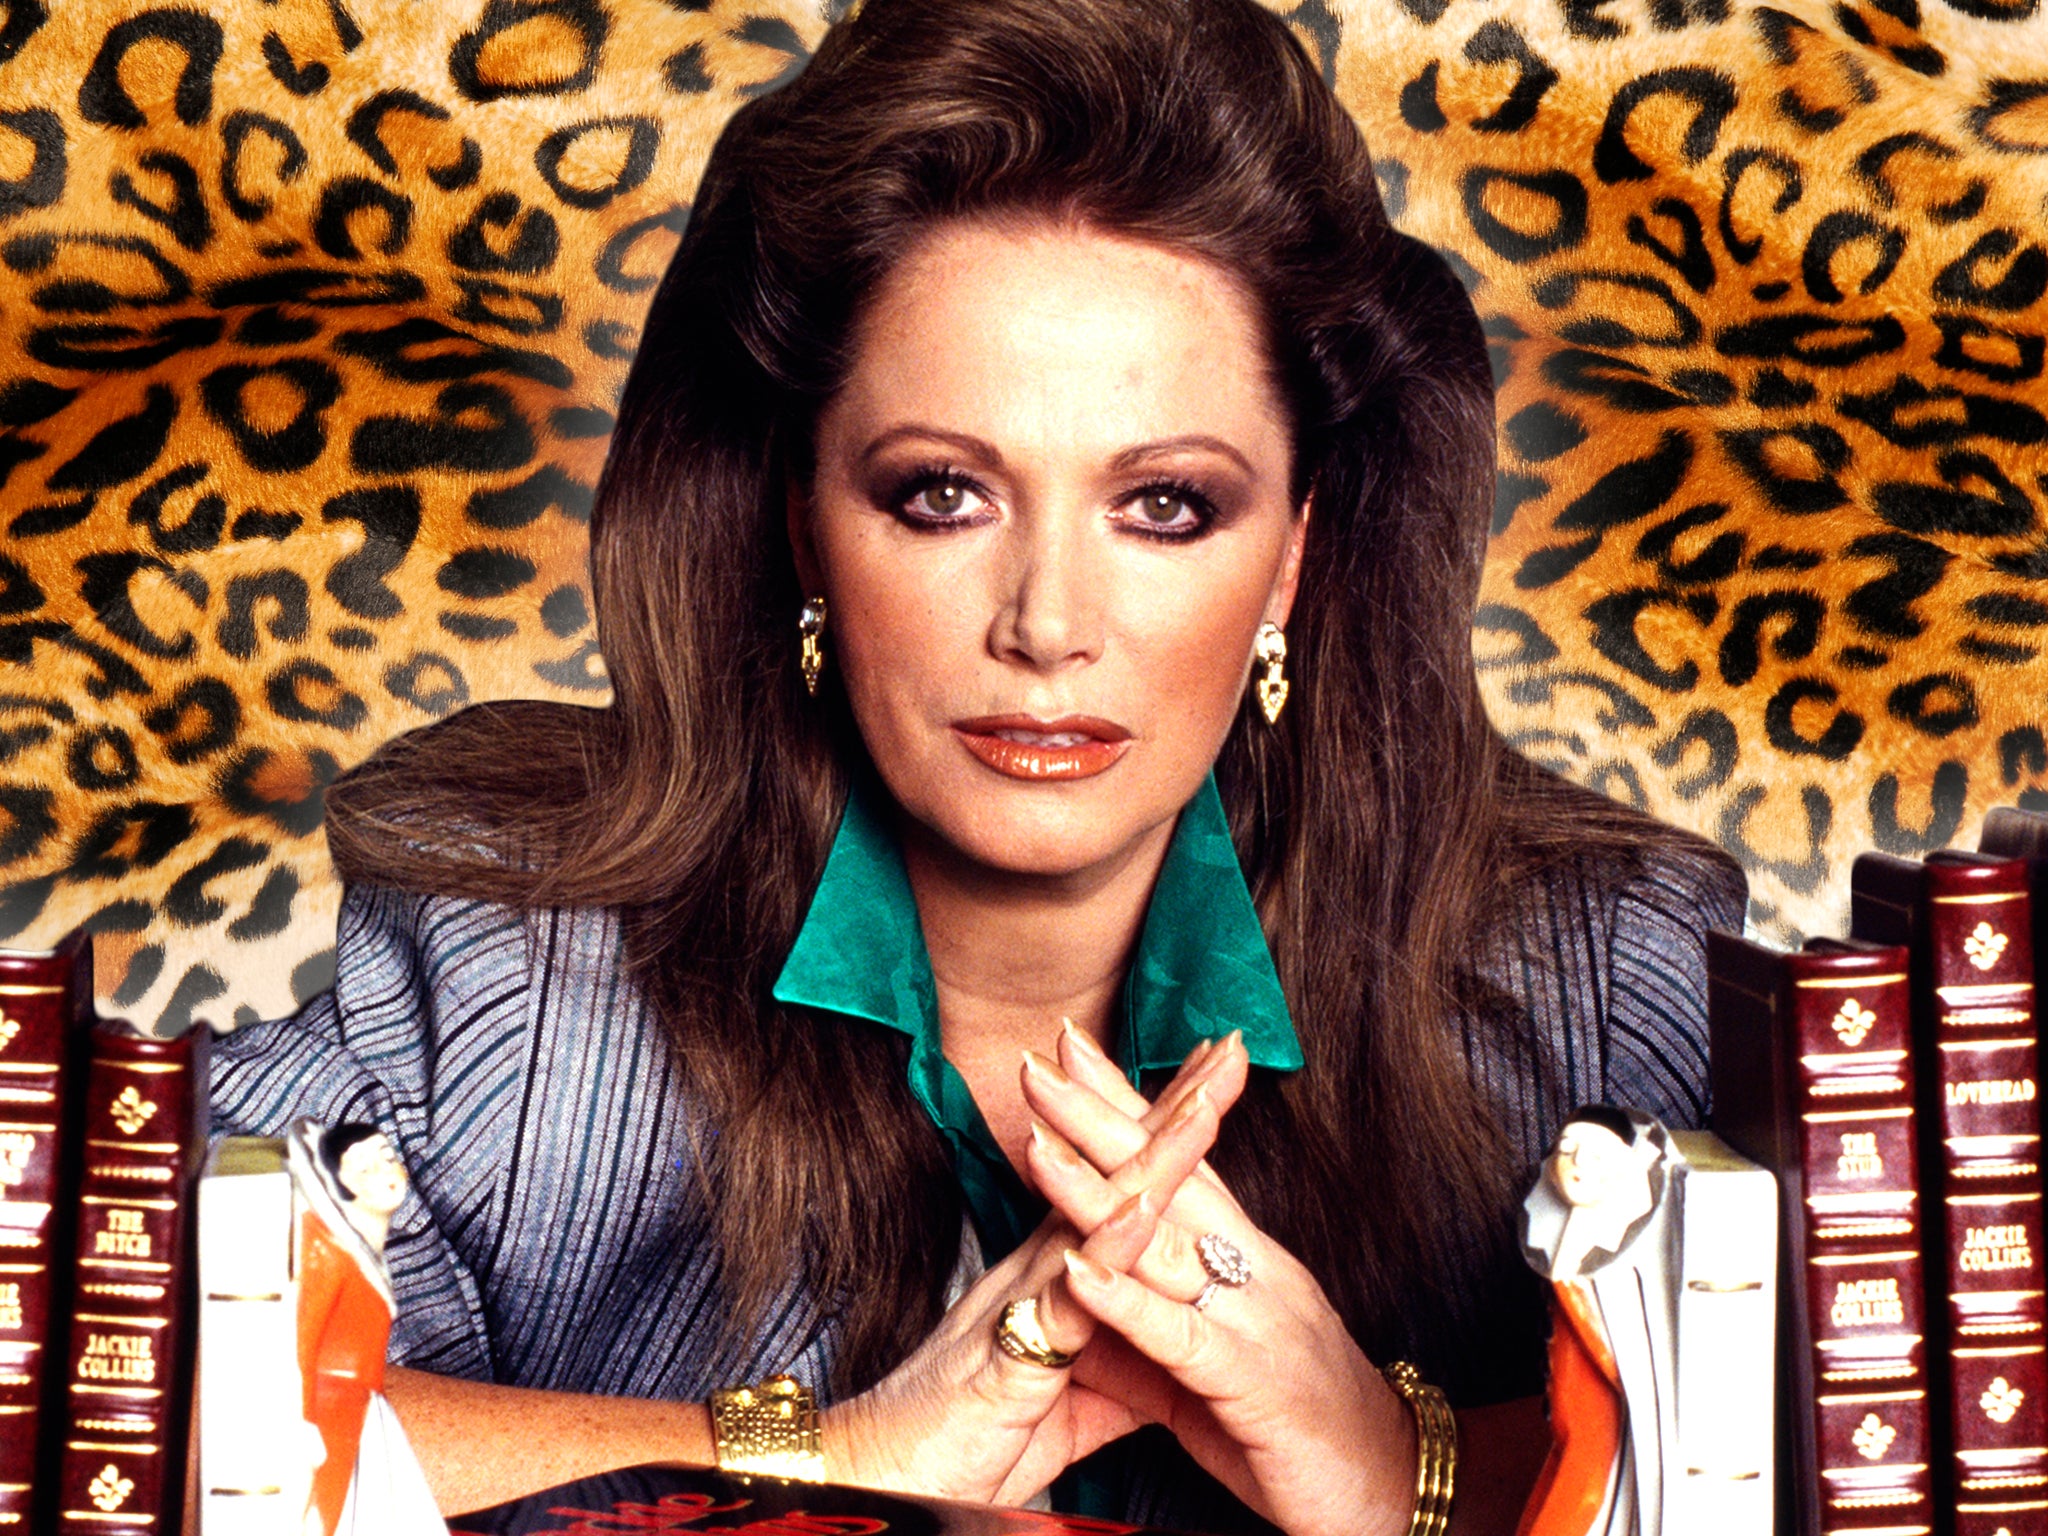 A sexed-up cartoon character whose talk show interviews were as sought after as her manuscripts: Jackie Collins in 1998